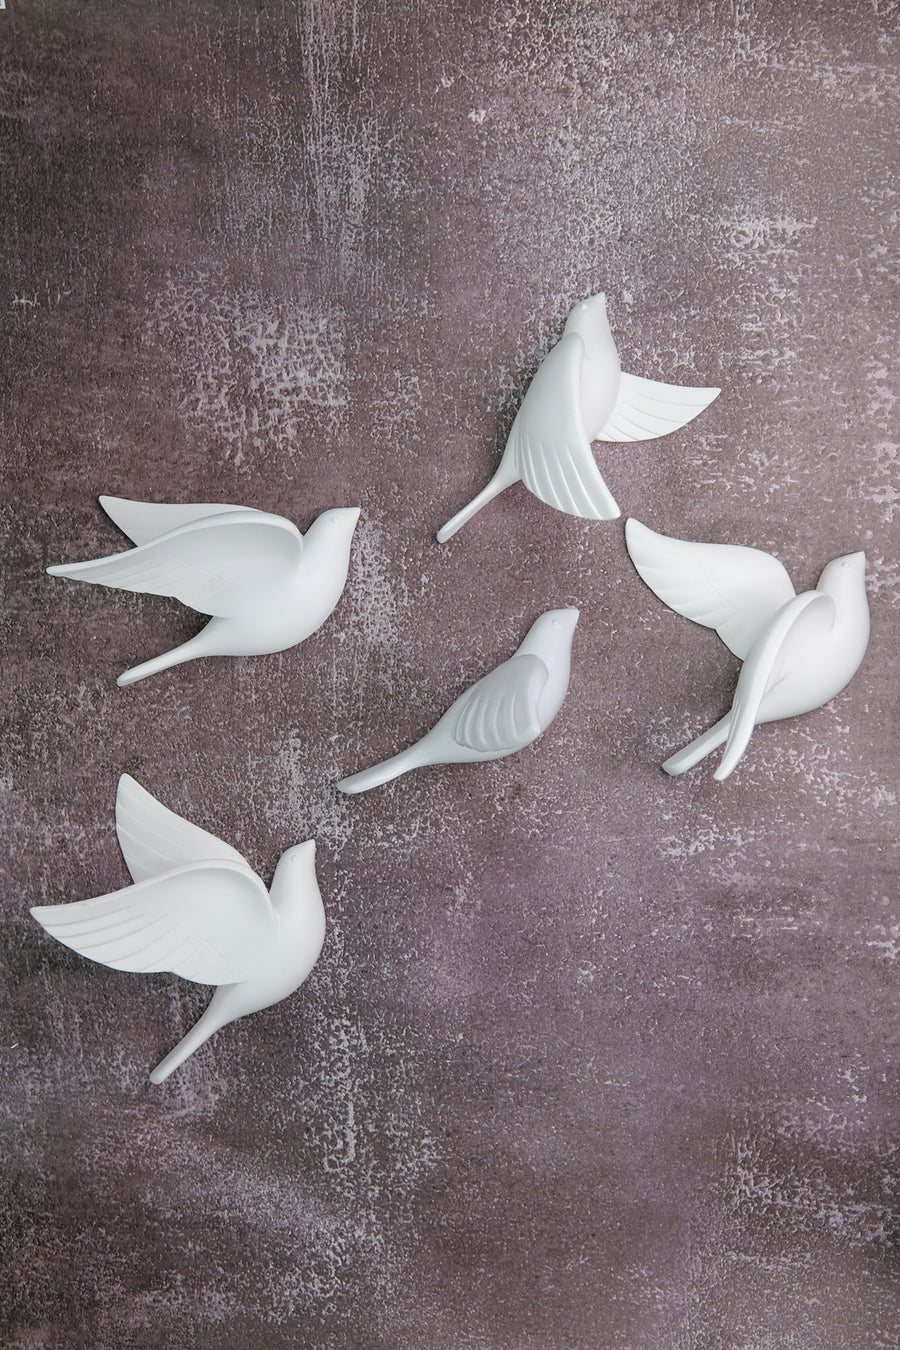 Sparrows Wall Decor in White